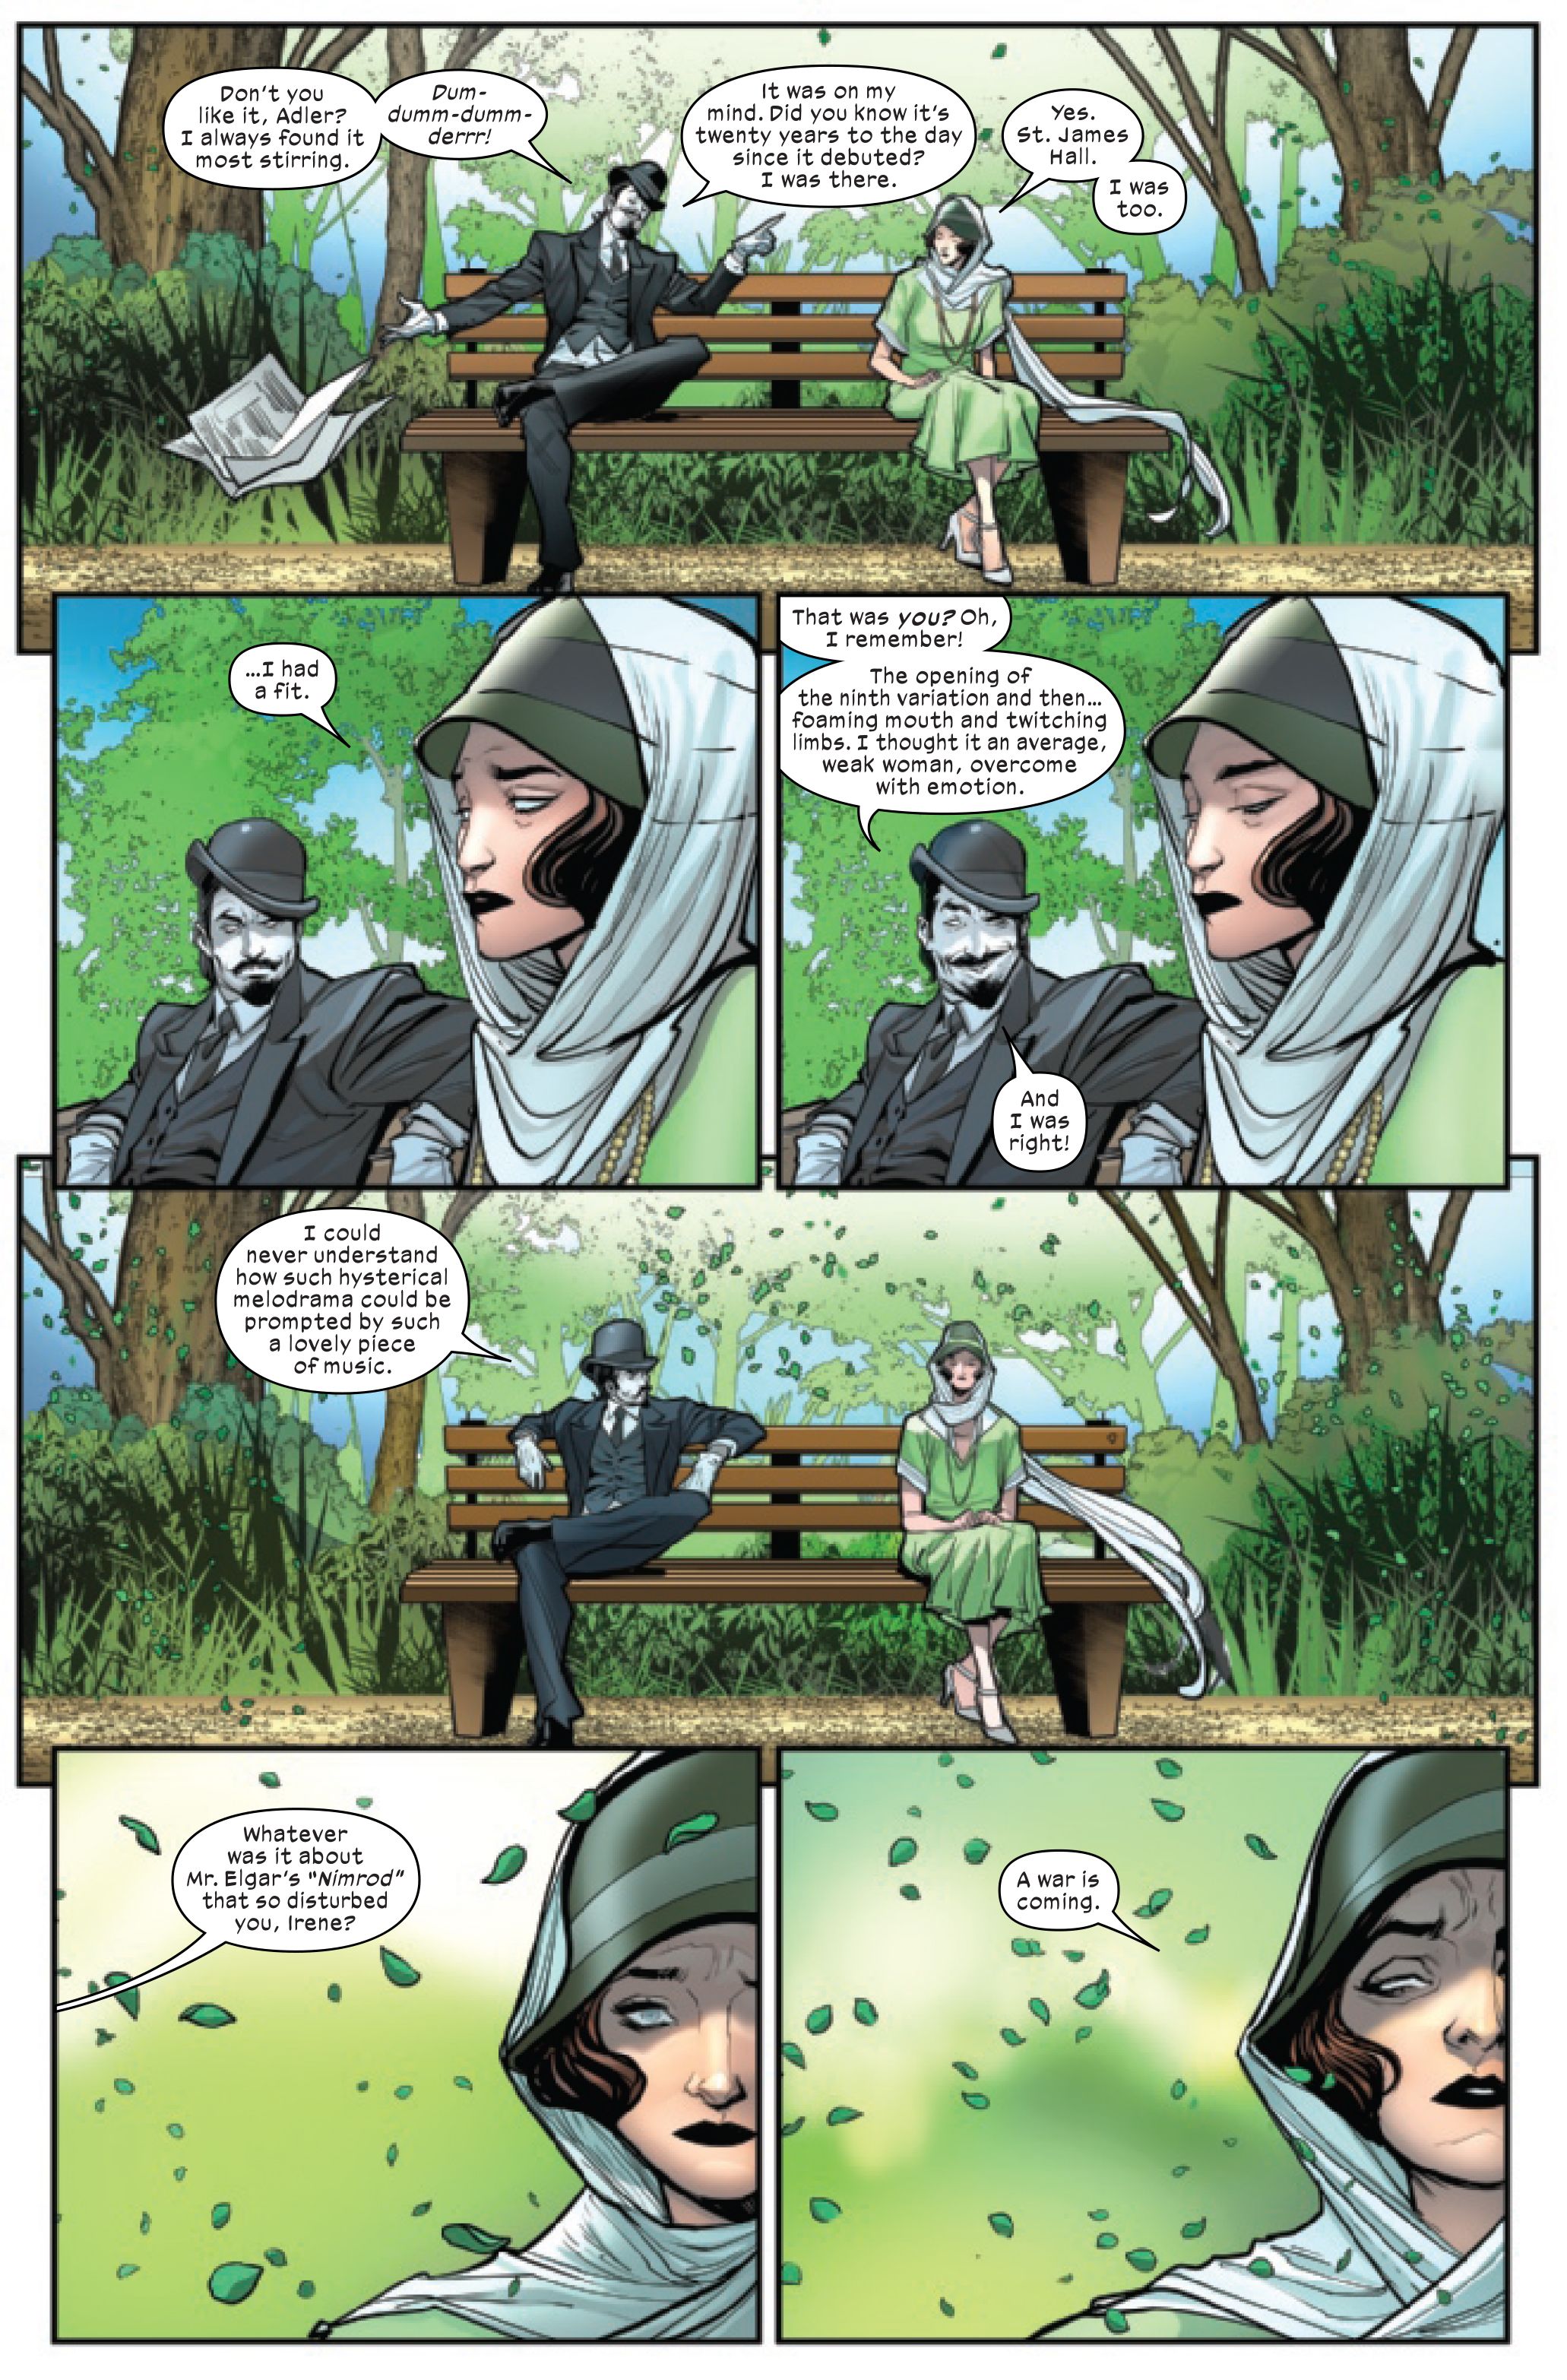 Mister Sinister and Irene Adler/Destiny talk in Immortal X-Men #1, by Kieron Gillen and Lucas Werneck. (Page 2)